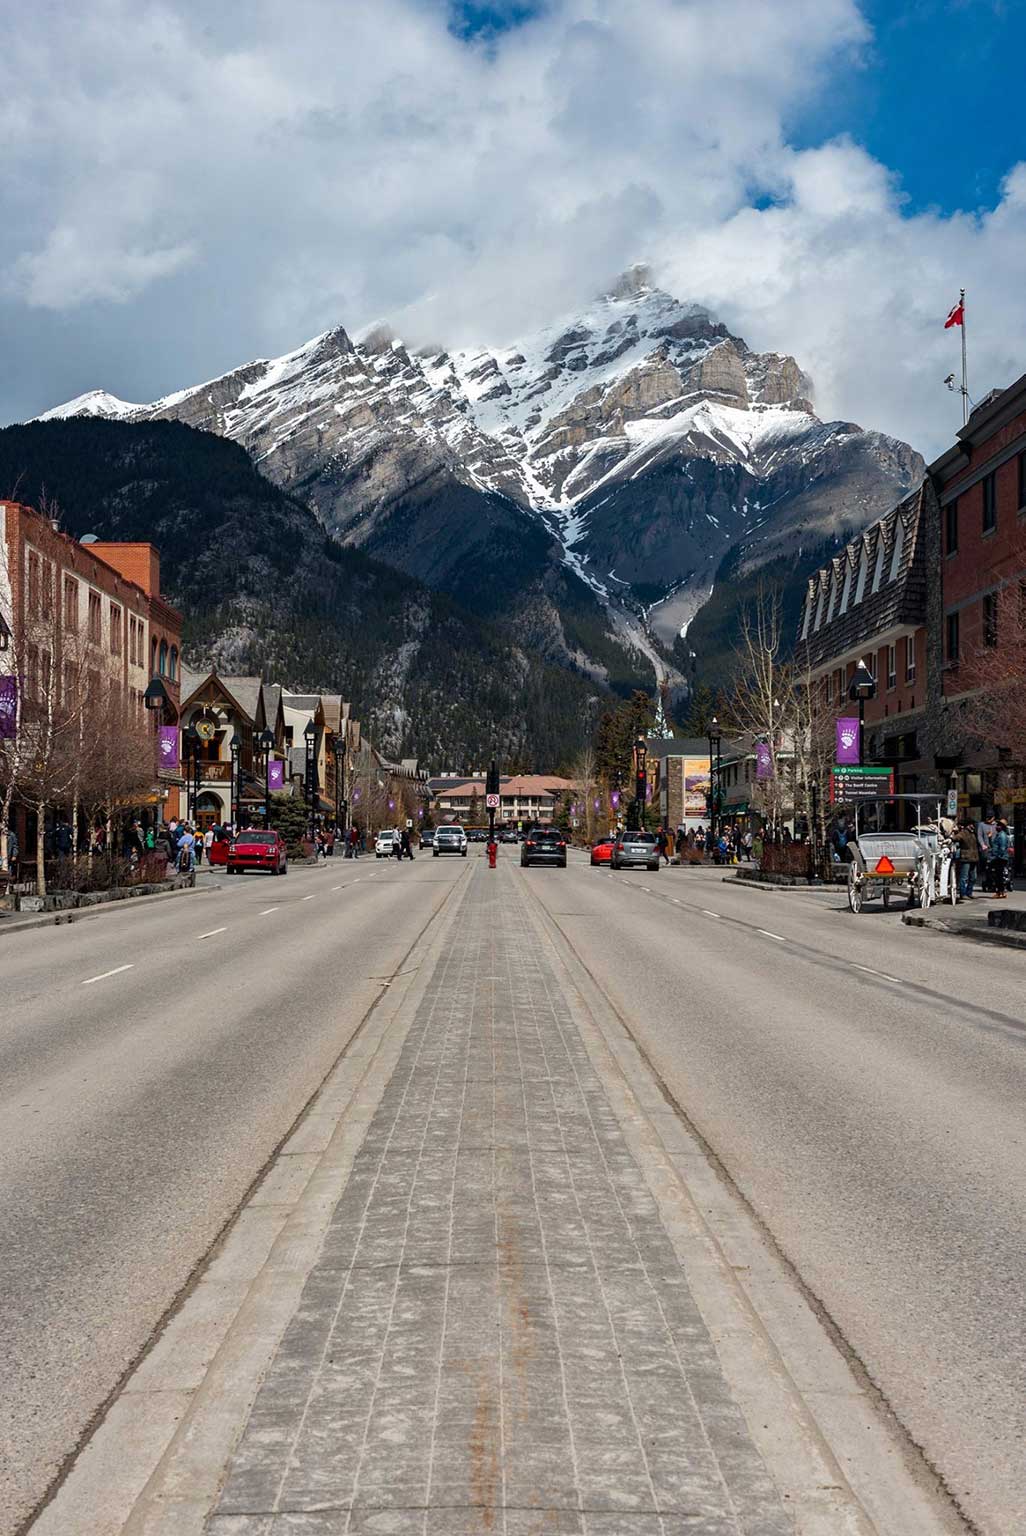 Main image, Banff picture